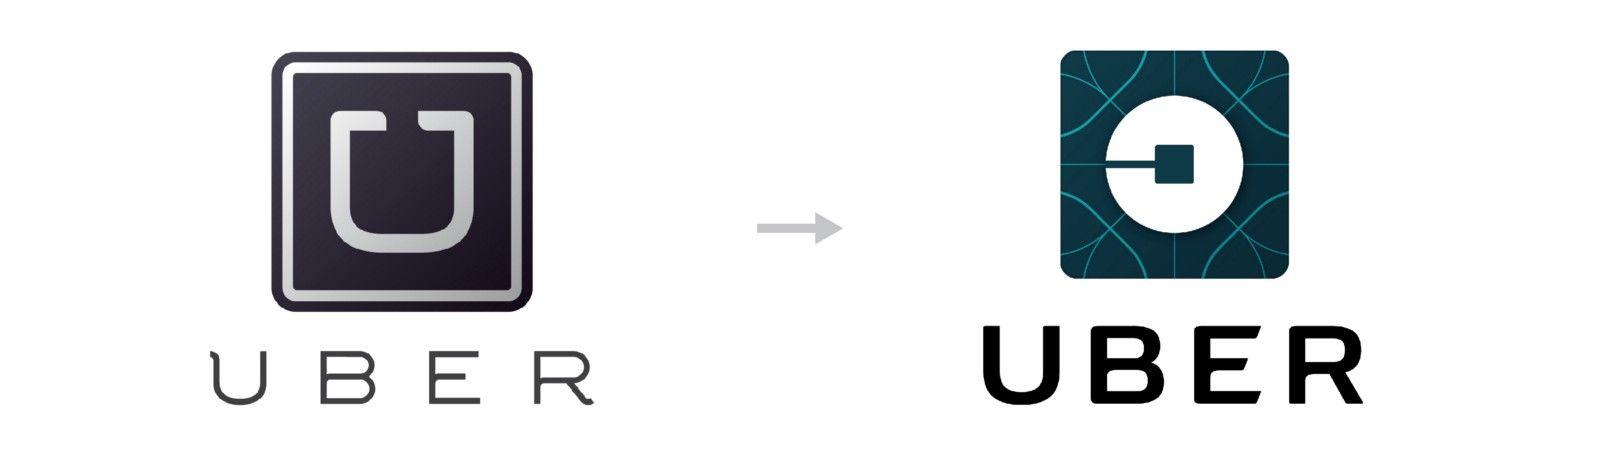 Uber Logo - A Closer Look at the 2016 Uber Redesign – Look and Logo – Medium